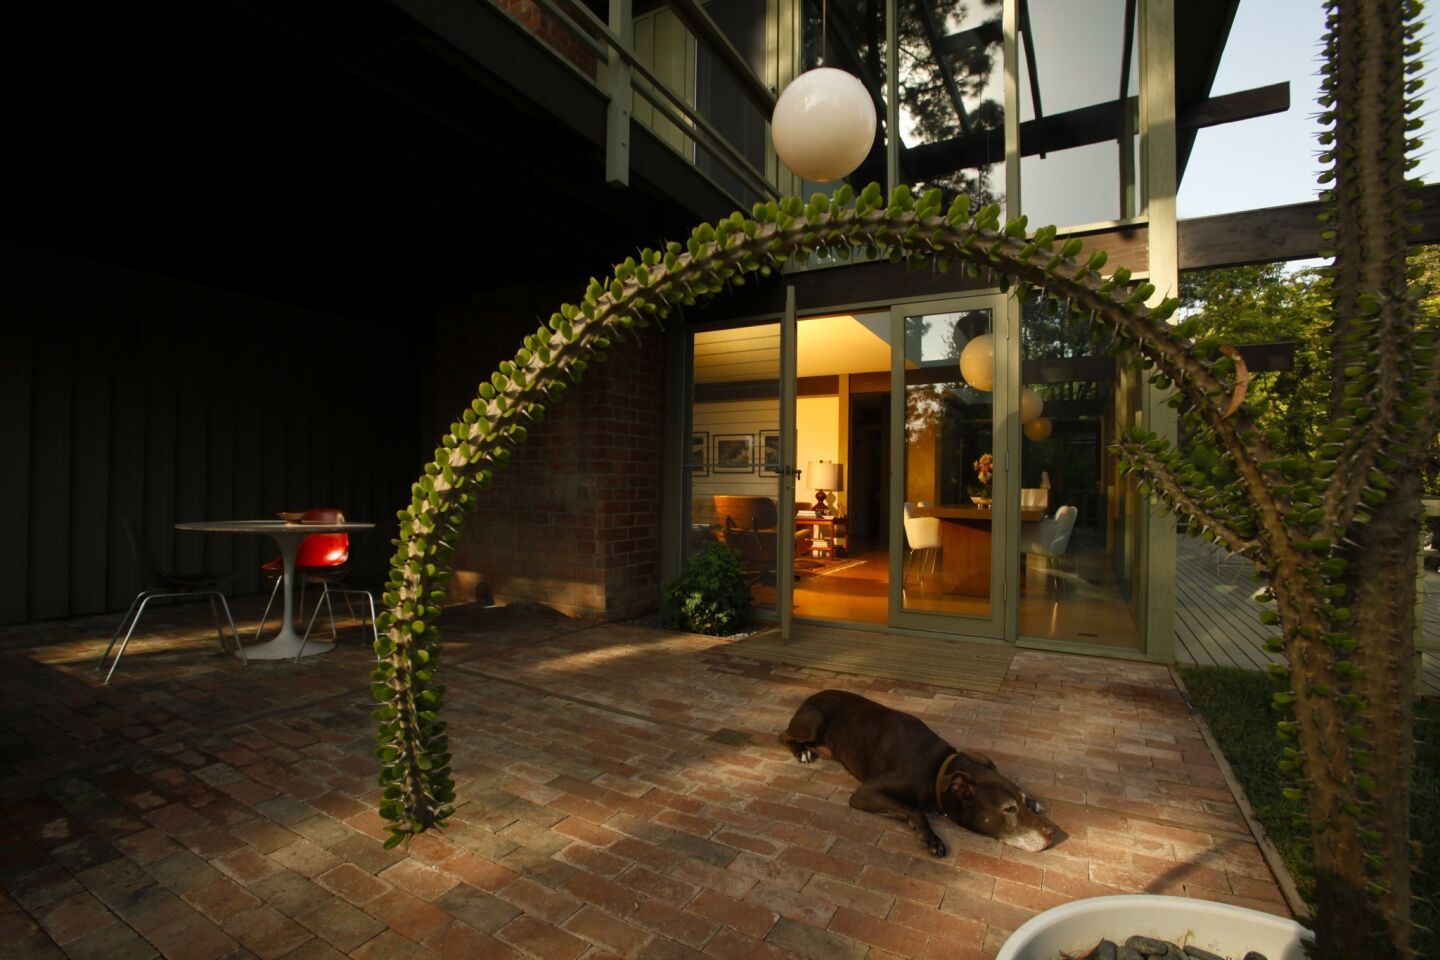 Homeowner Christophe Burusco's dog, Bruno, finds a cool spot on the back patio. "Fortunately, the right person who cared about this house got it," said Dennis Smith, president of Buff, Smith & Hensman Architects. "He did all the right things." More design profiles: California homes and gardens